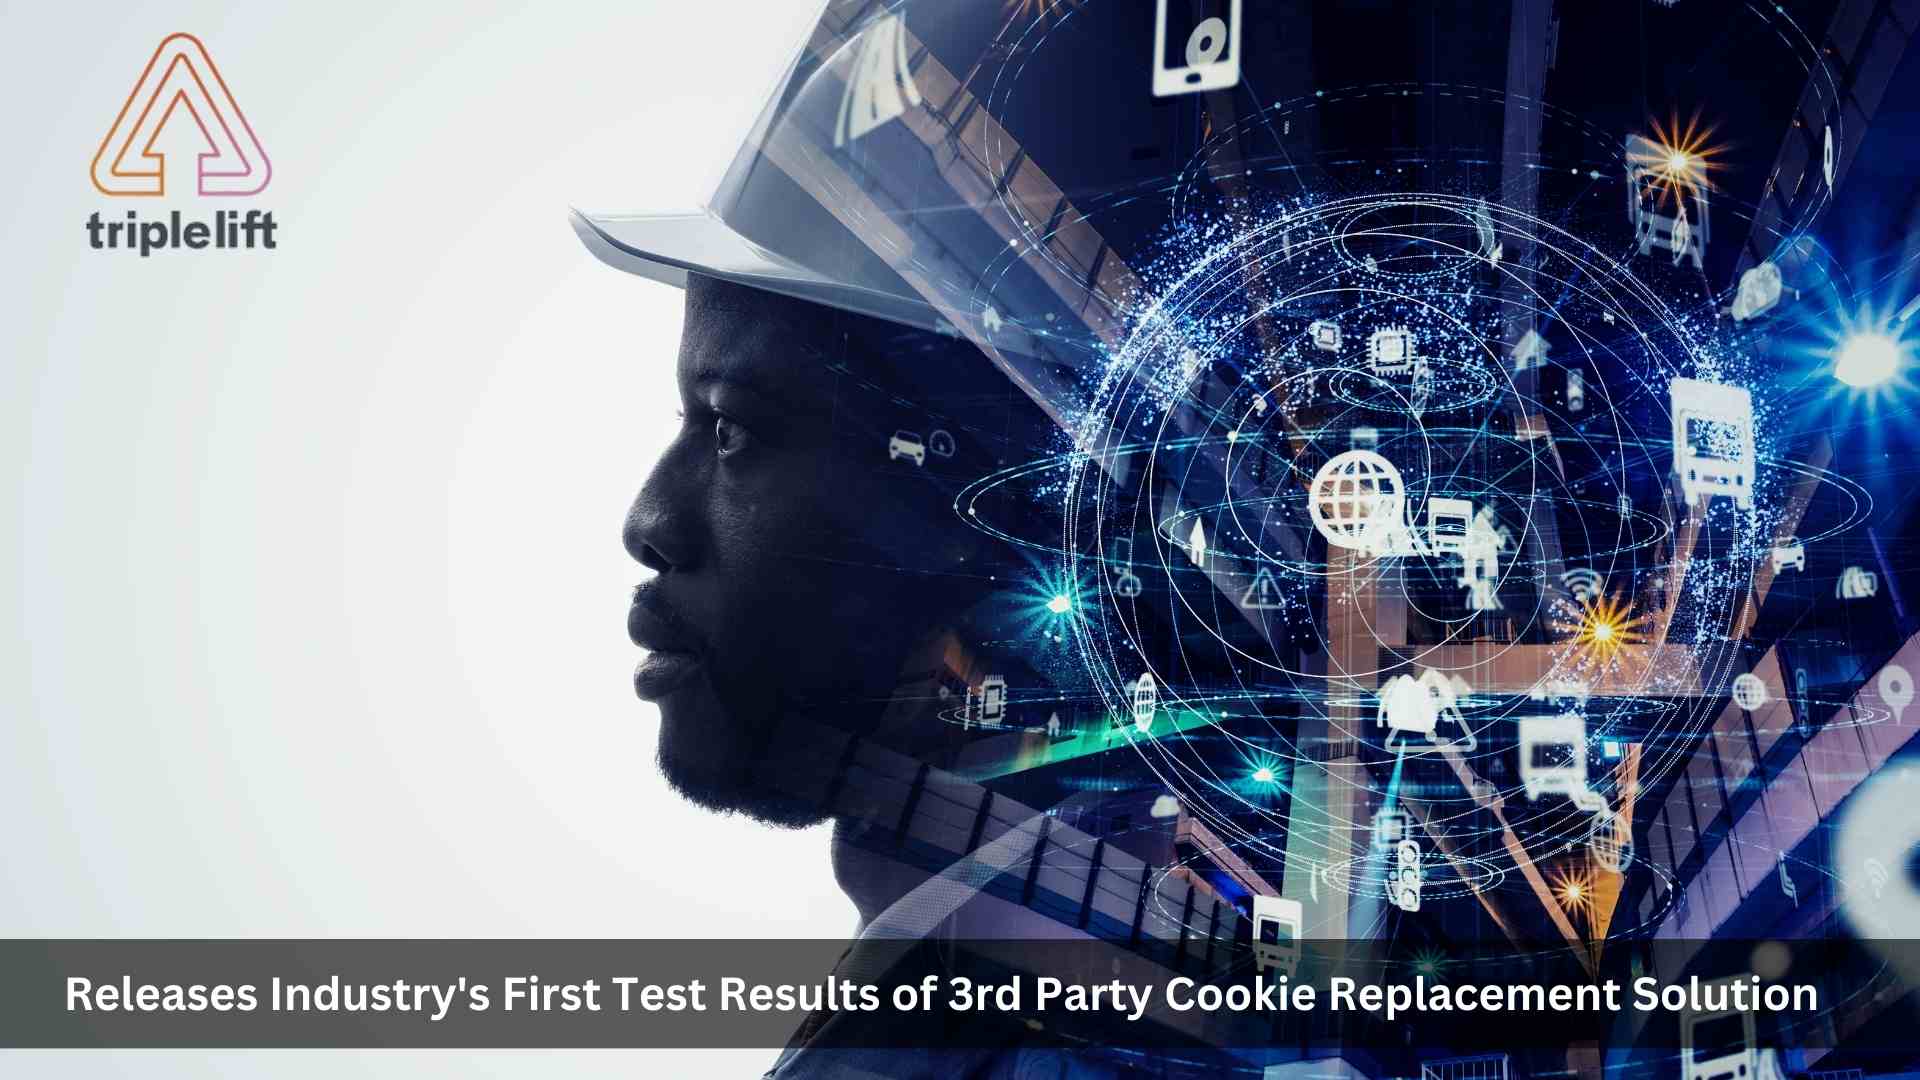 TripleLift Releases Industry's First Test Results of 3rd Party Cookie Replacement Solution